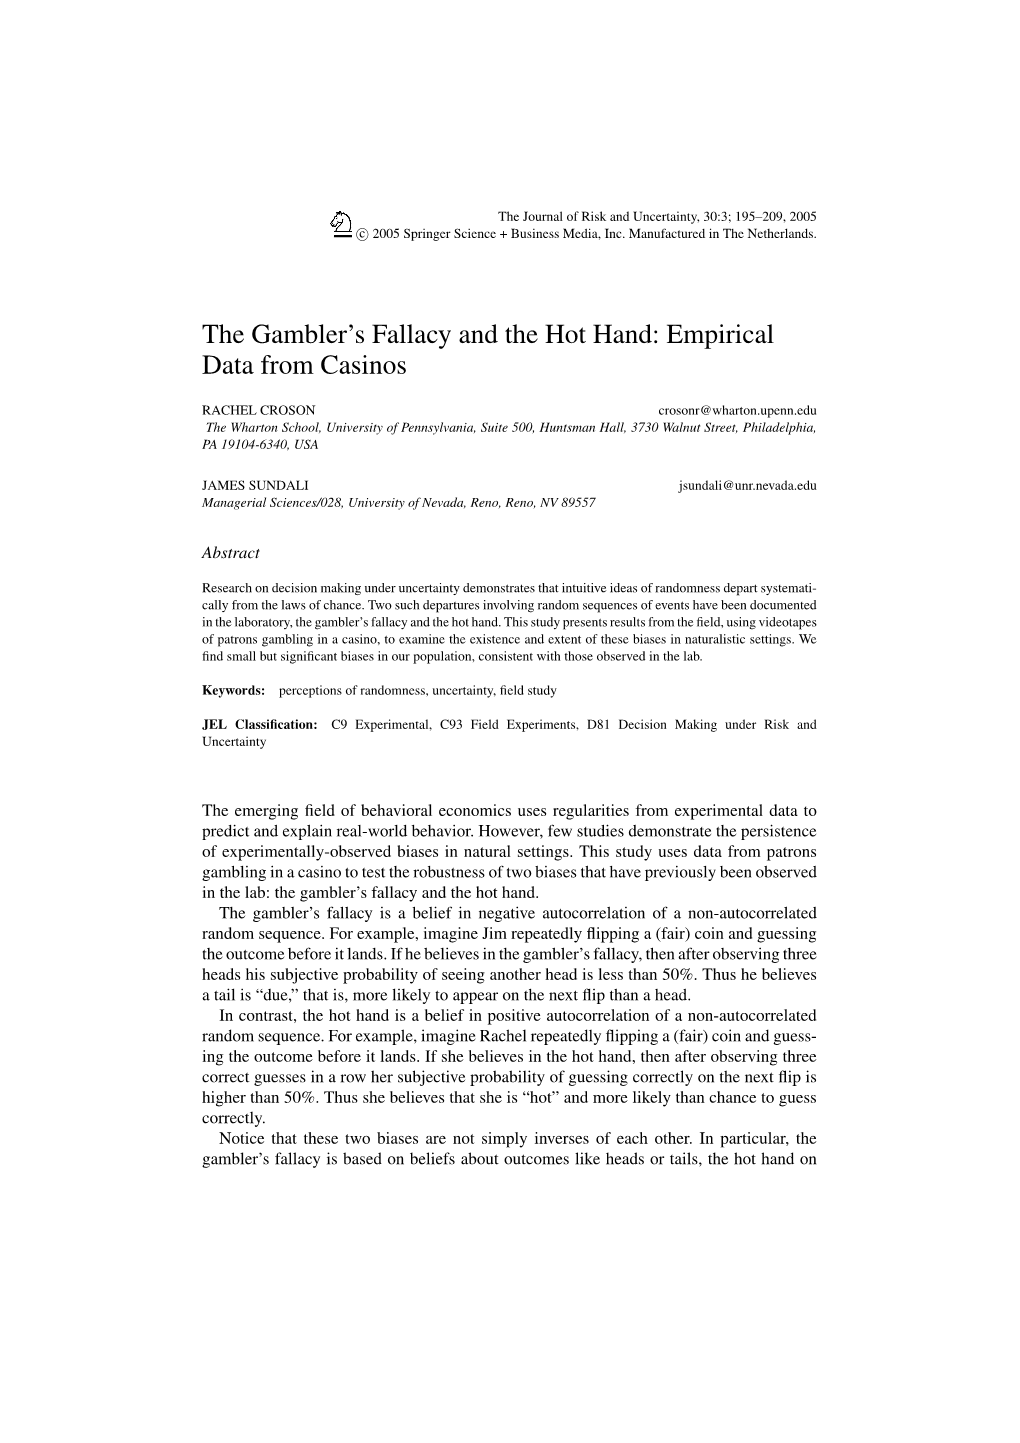 The Gambler's Fallacy and the Hot Hand: Empirical Data from Casinos